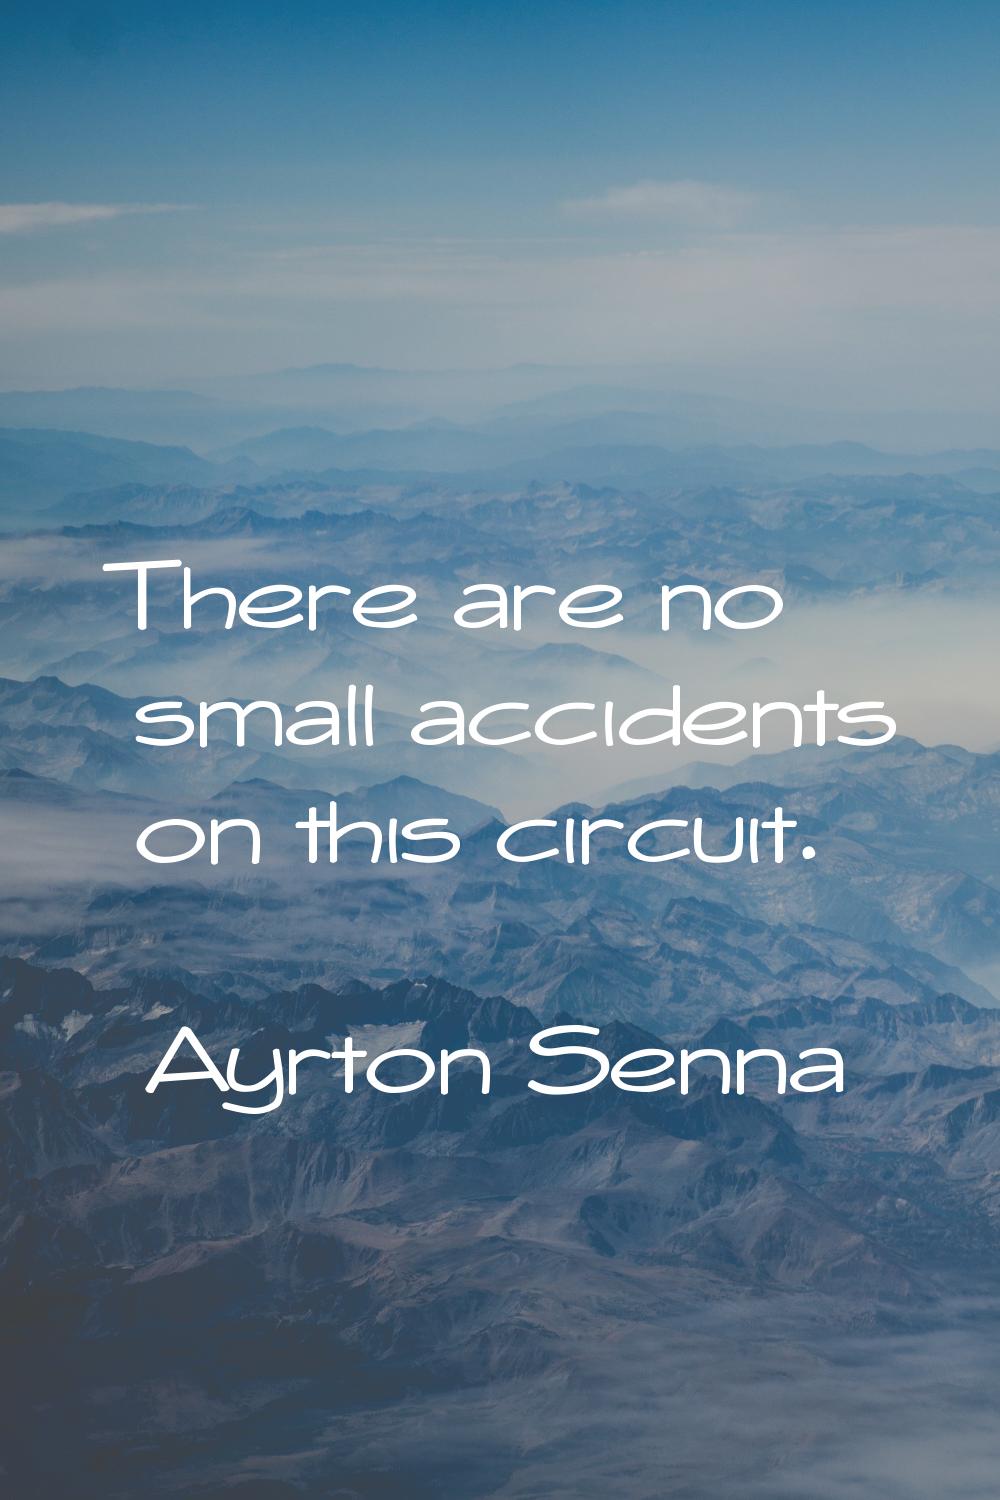 There are no small accidents on this circuit.